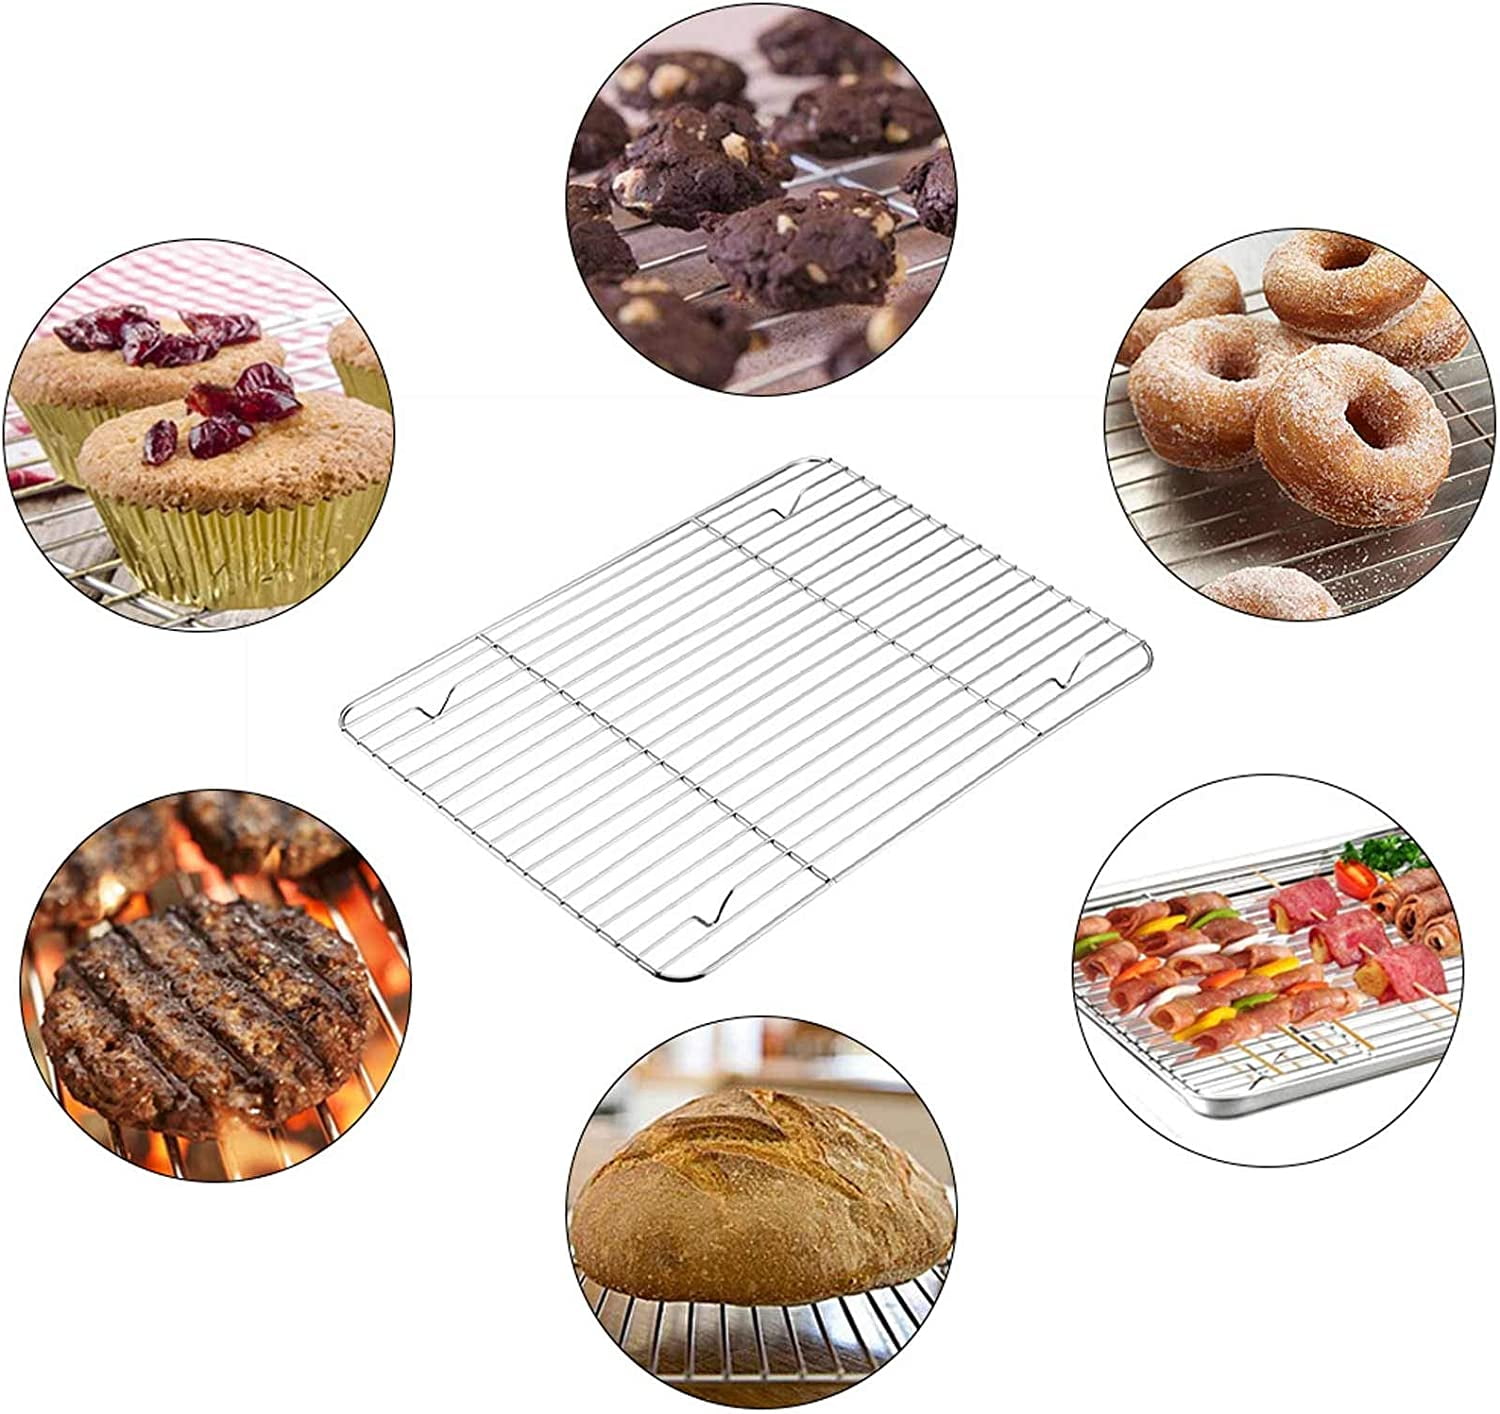 EMDMAK 4 Piece Baking Sheets with Cooling Rack Set, 10.5 x 8 x 1 Inch  Stainless Steel Cookie Sheet and Wire Rack for Baking, Dishwasher Safe